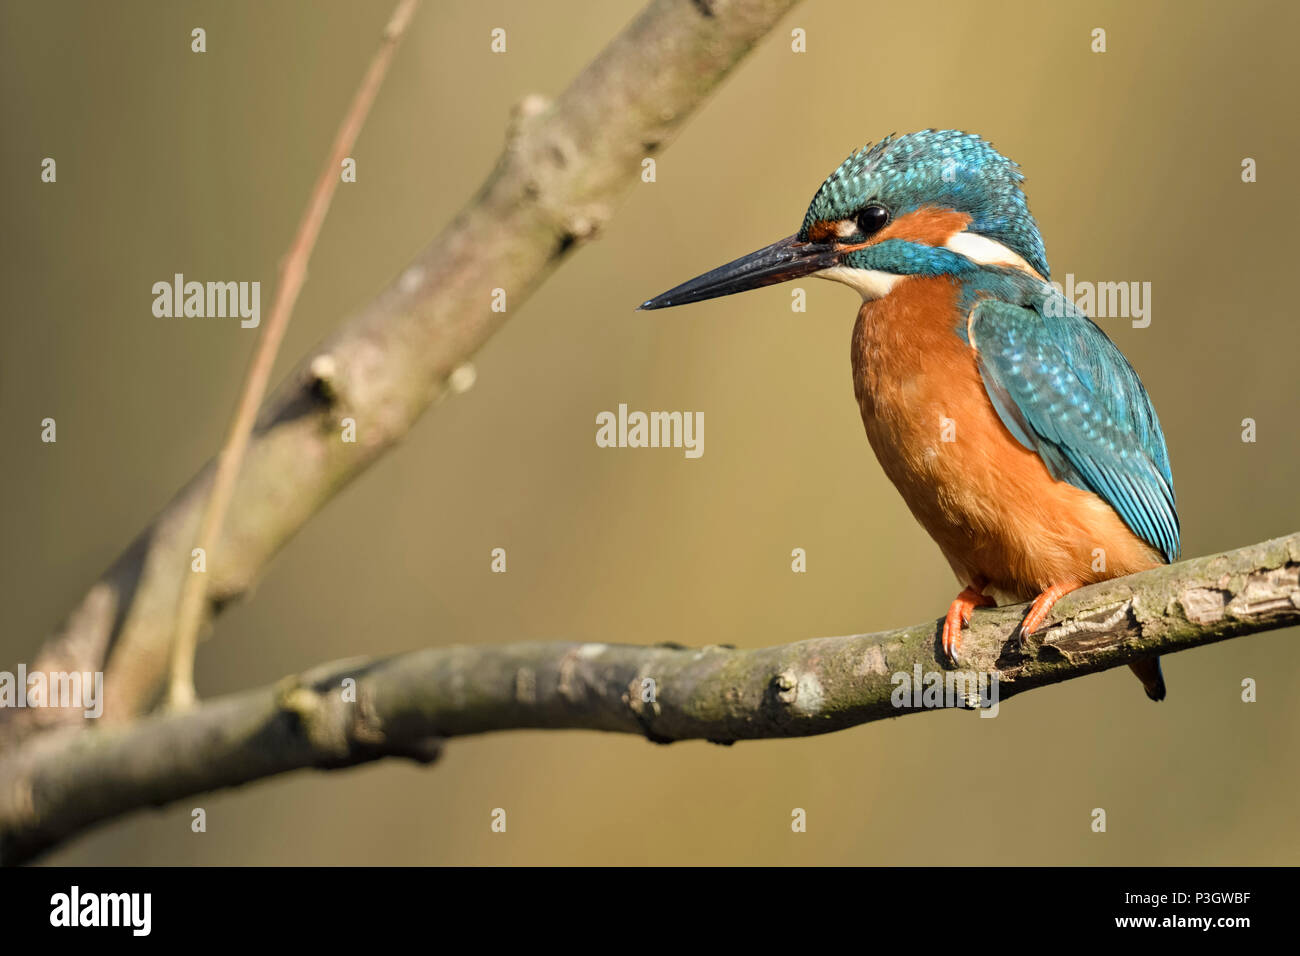 Kingfisher / Eisvogel  ( Alcedo atthis ), male bird in natural setting, perched on a branch for hunting, detailled side view, nice light, wildlife, Eu Stock Photo